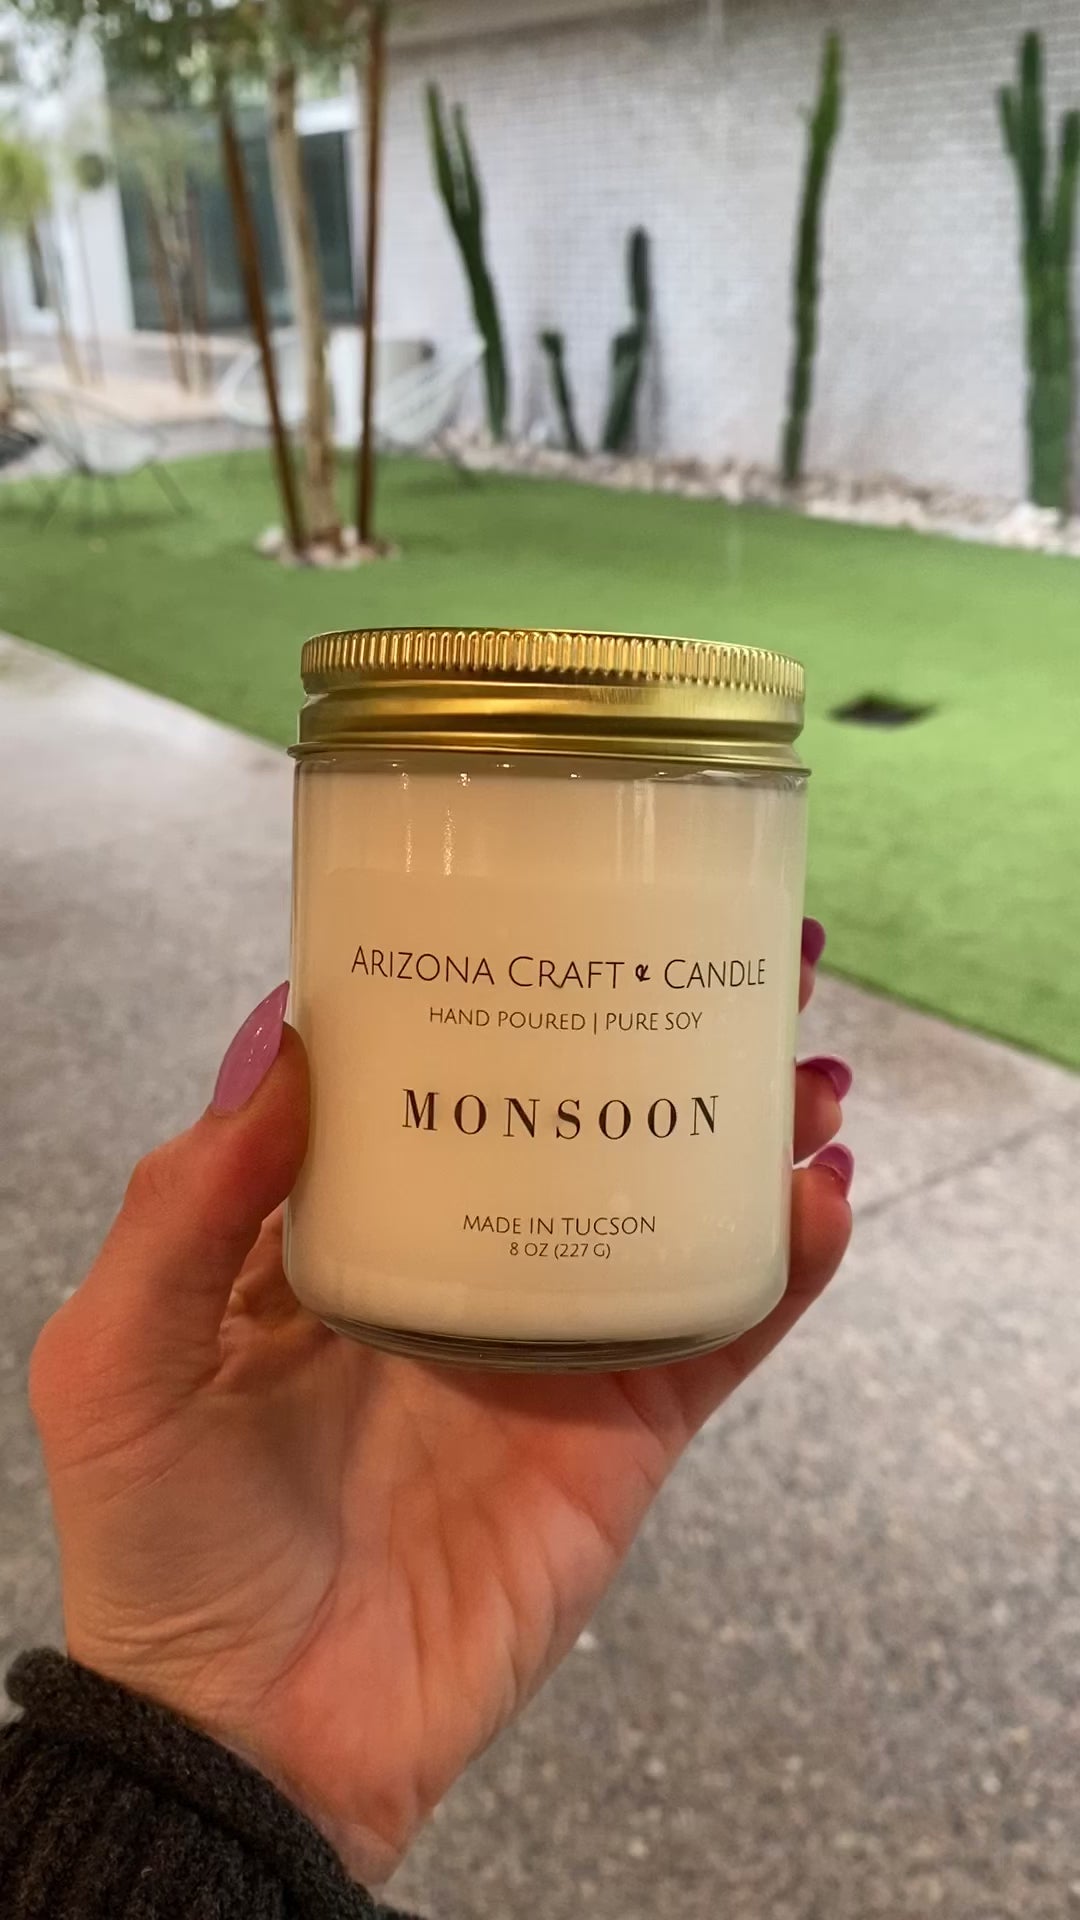 Monsoon candle being held with a real monsoon happening in the background of the video